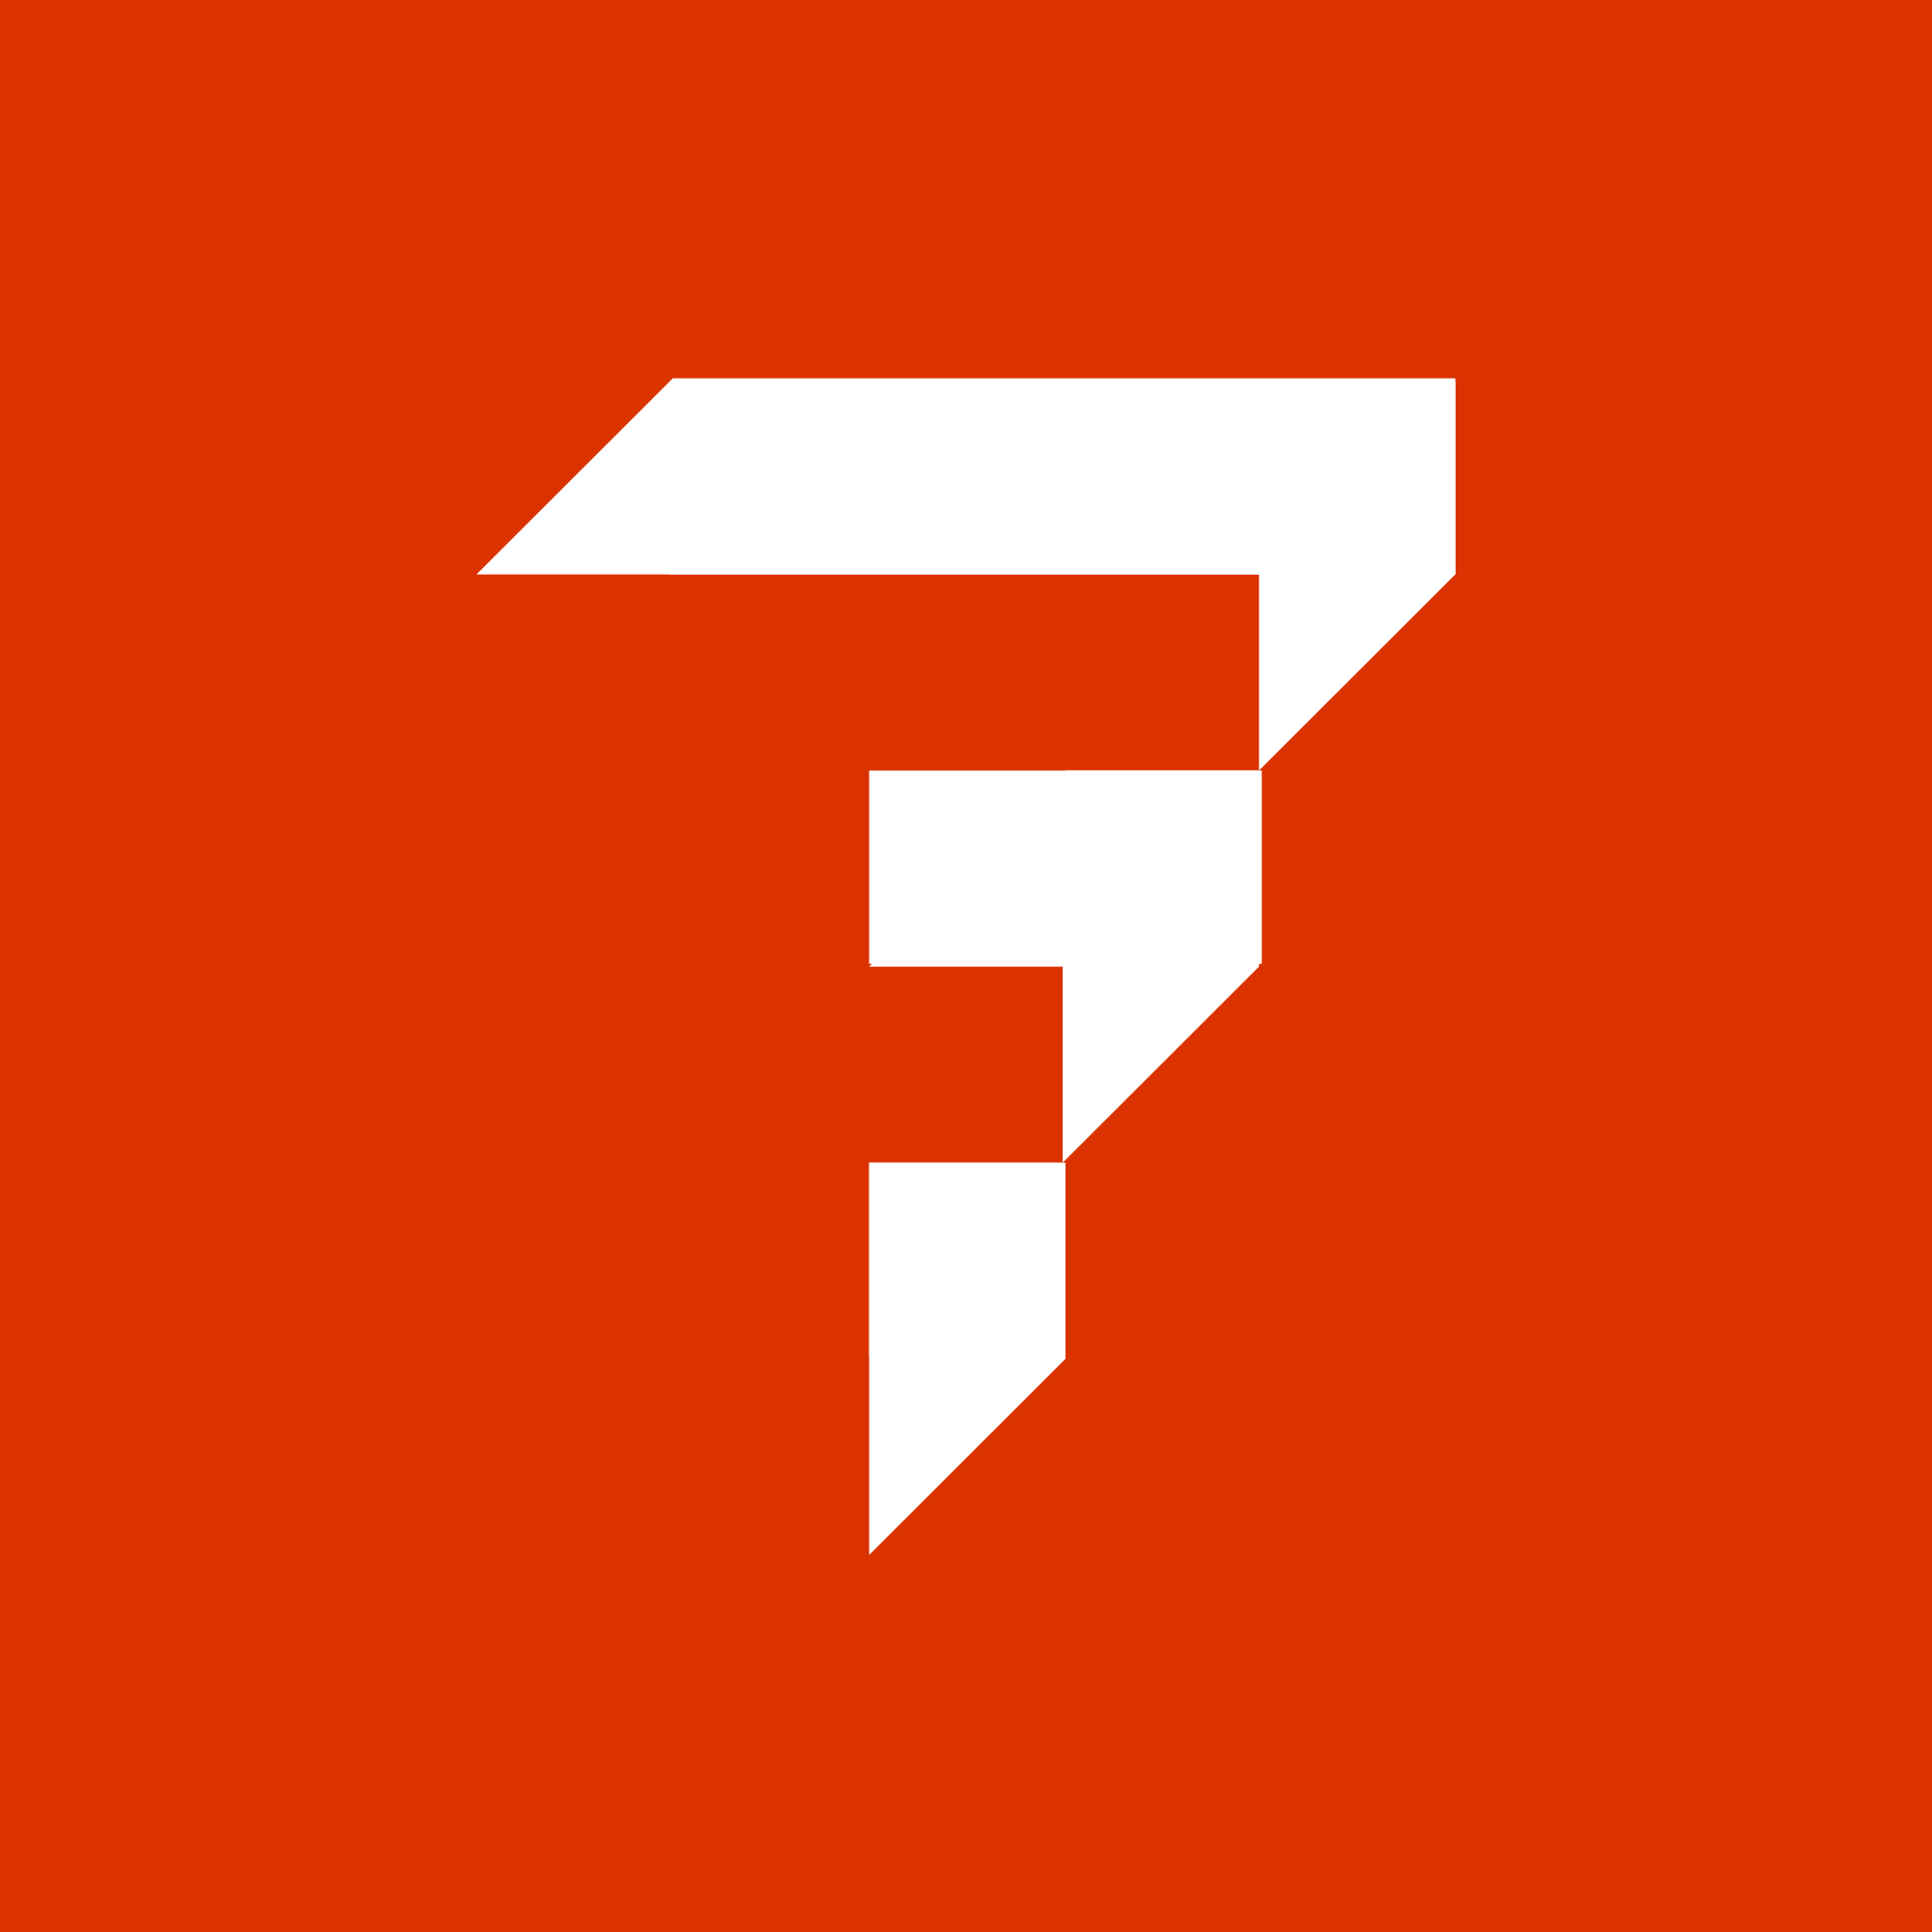 a white letter f on an orange background